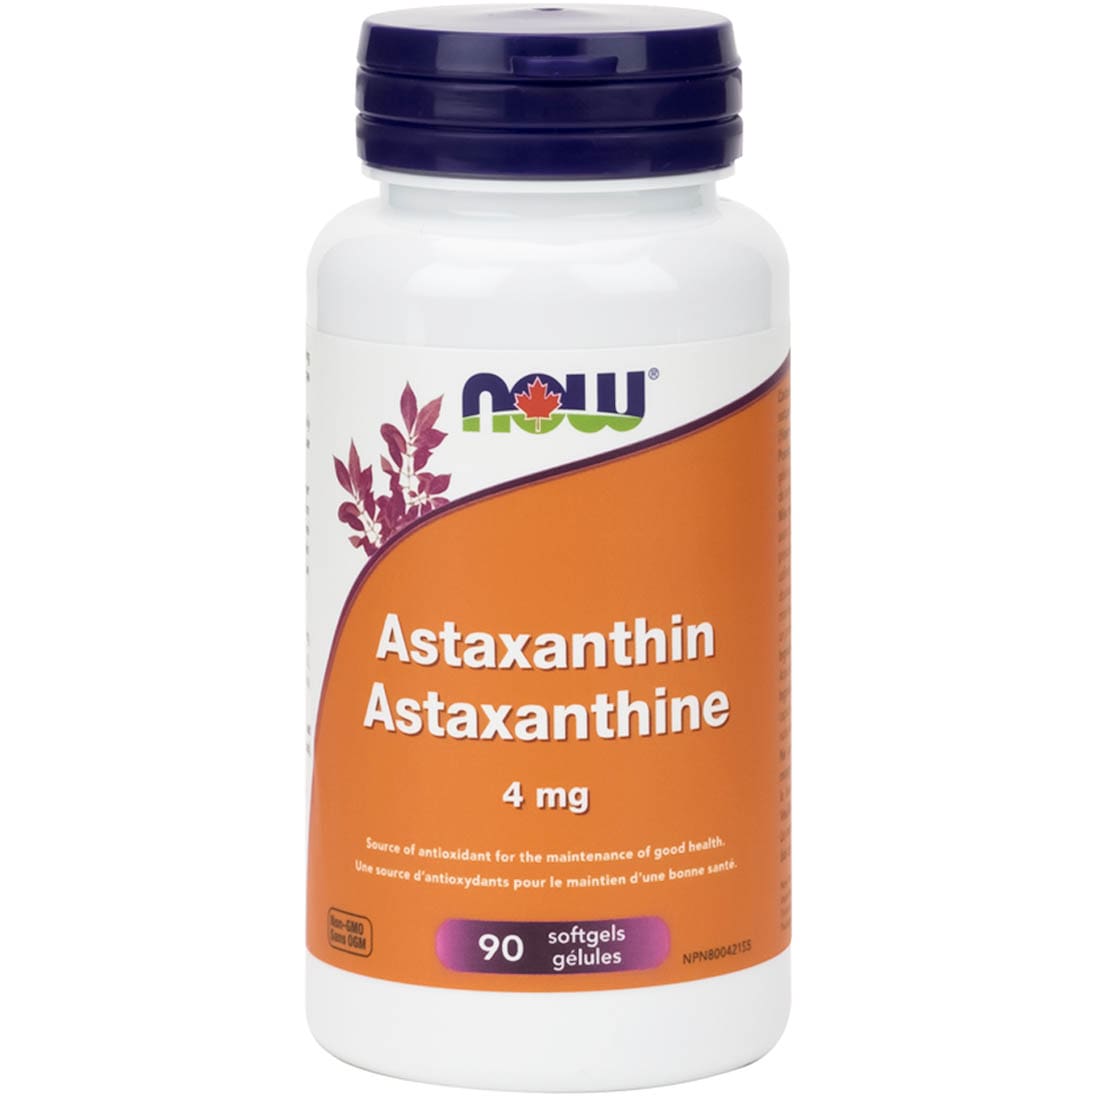 Astaxanthin and immune system support